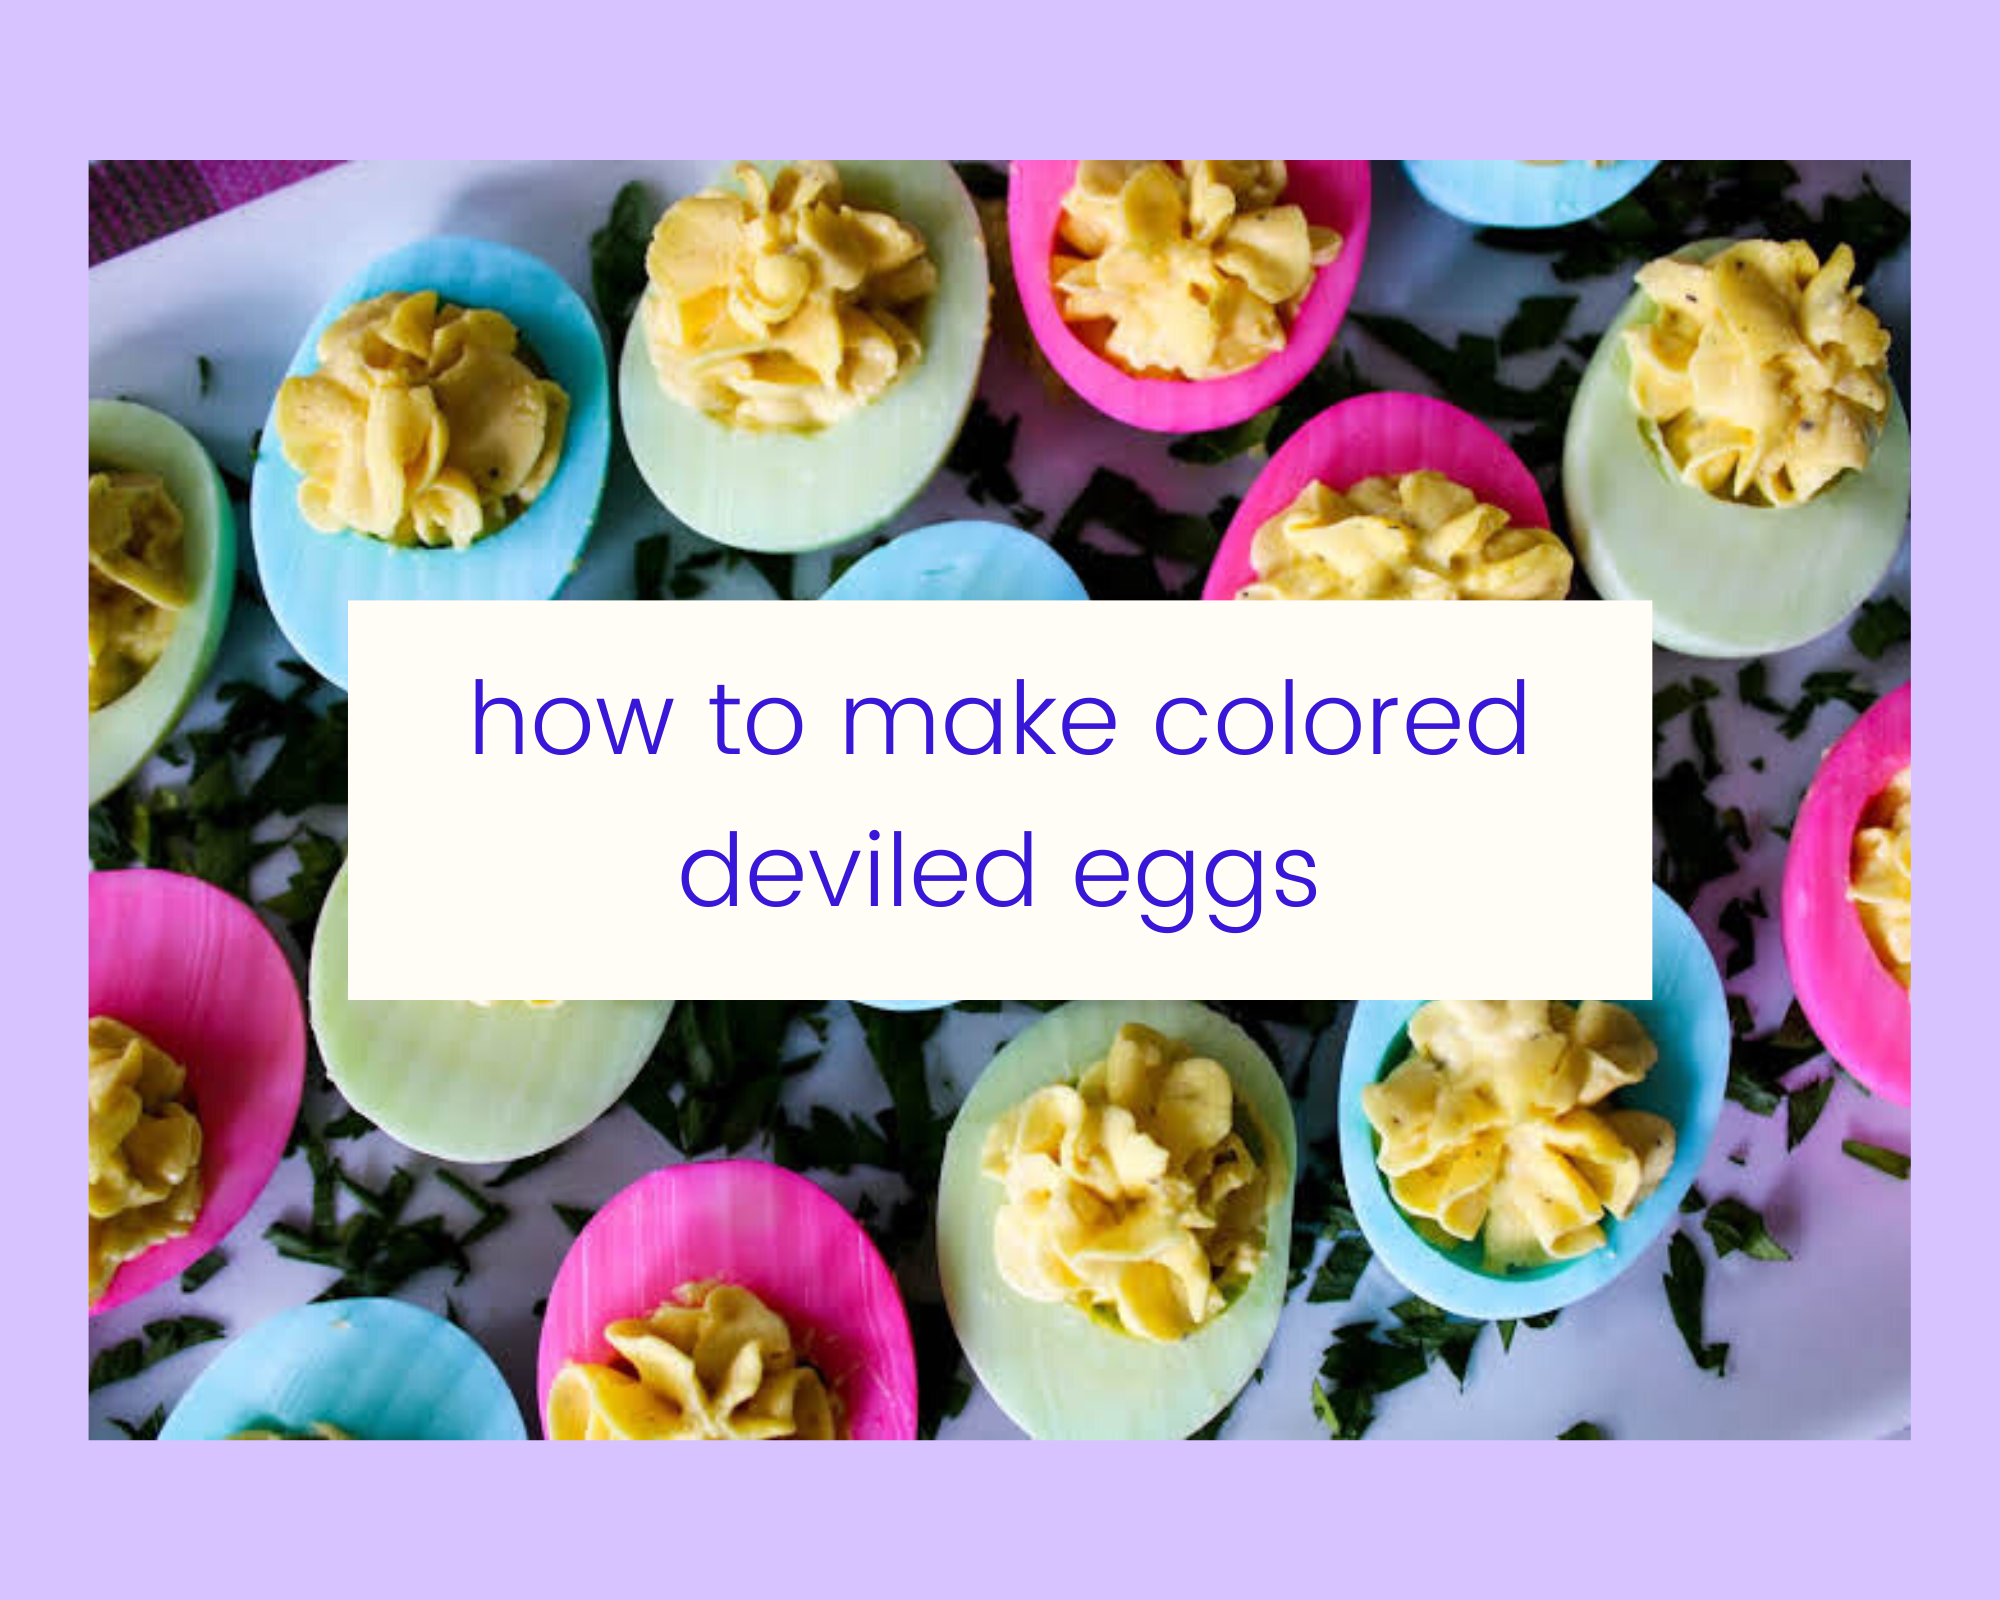 How to Make Colored Deviled Eggs